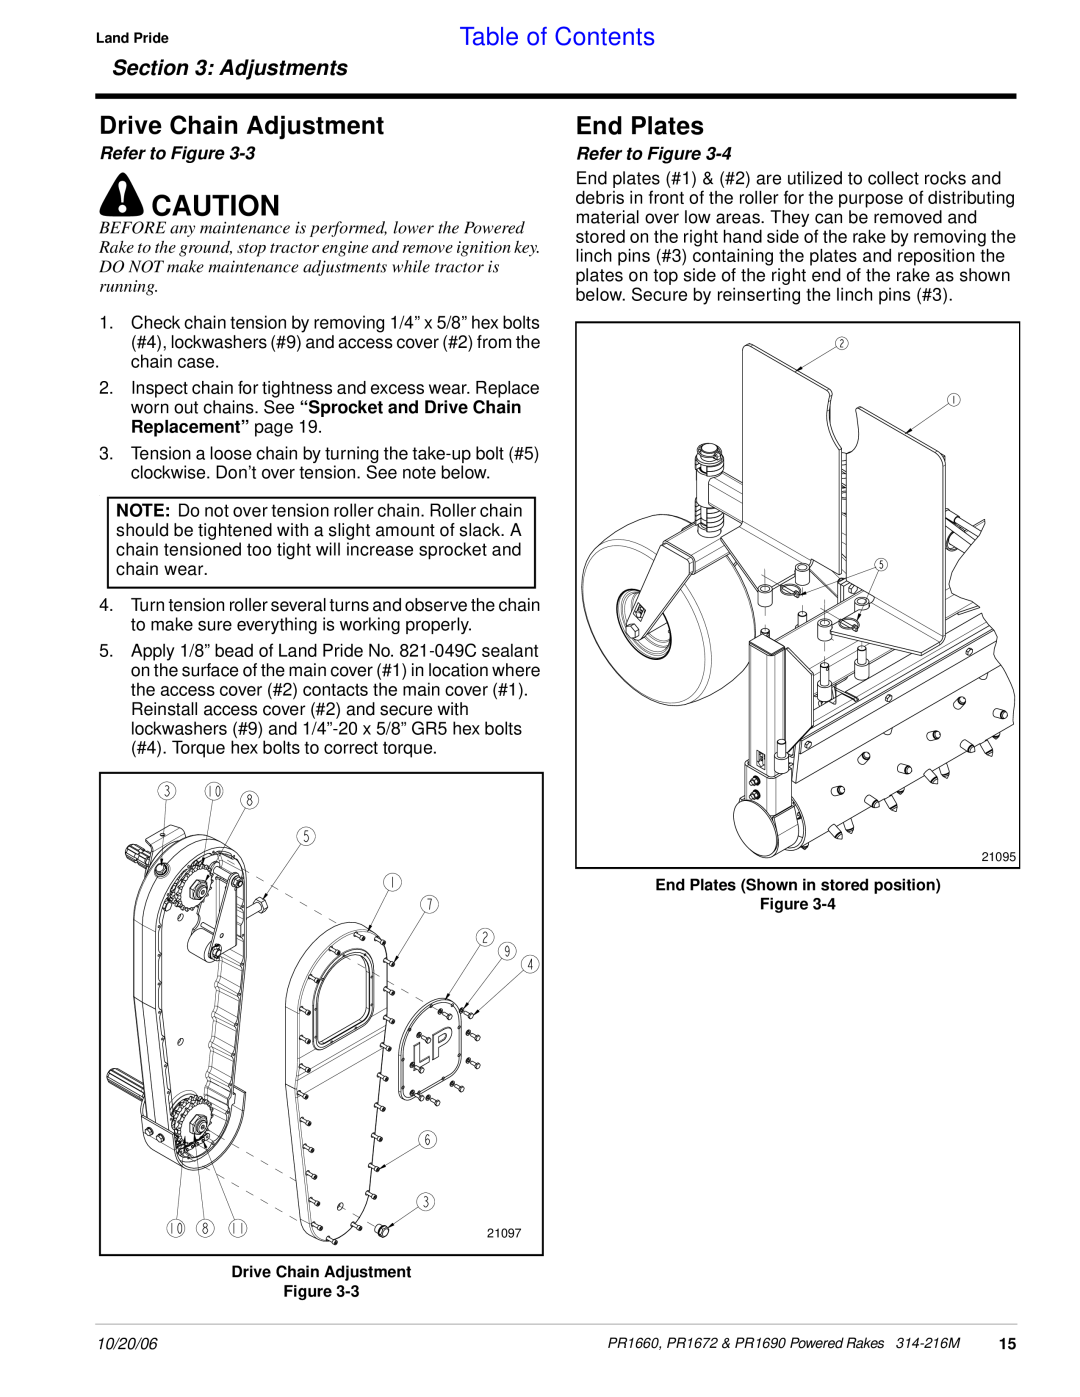 Land Pride PR1672 manual Drive Chain Adjustment, End Plates, Table of Contents, Adjustments, Refer to Figure 